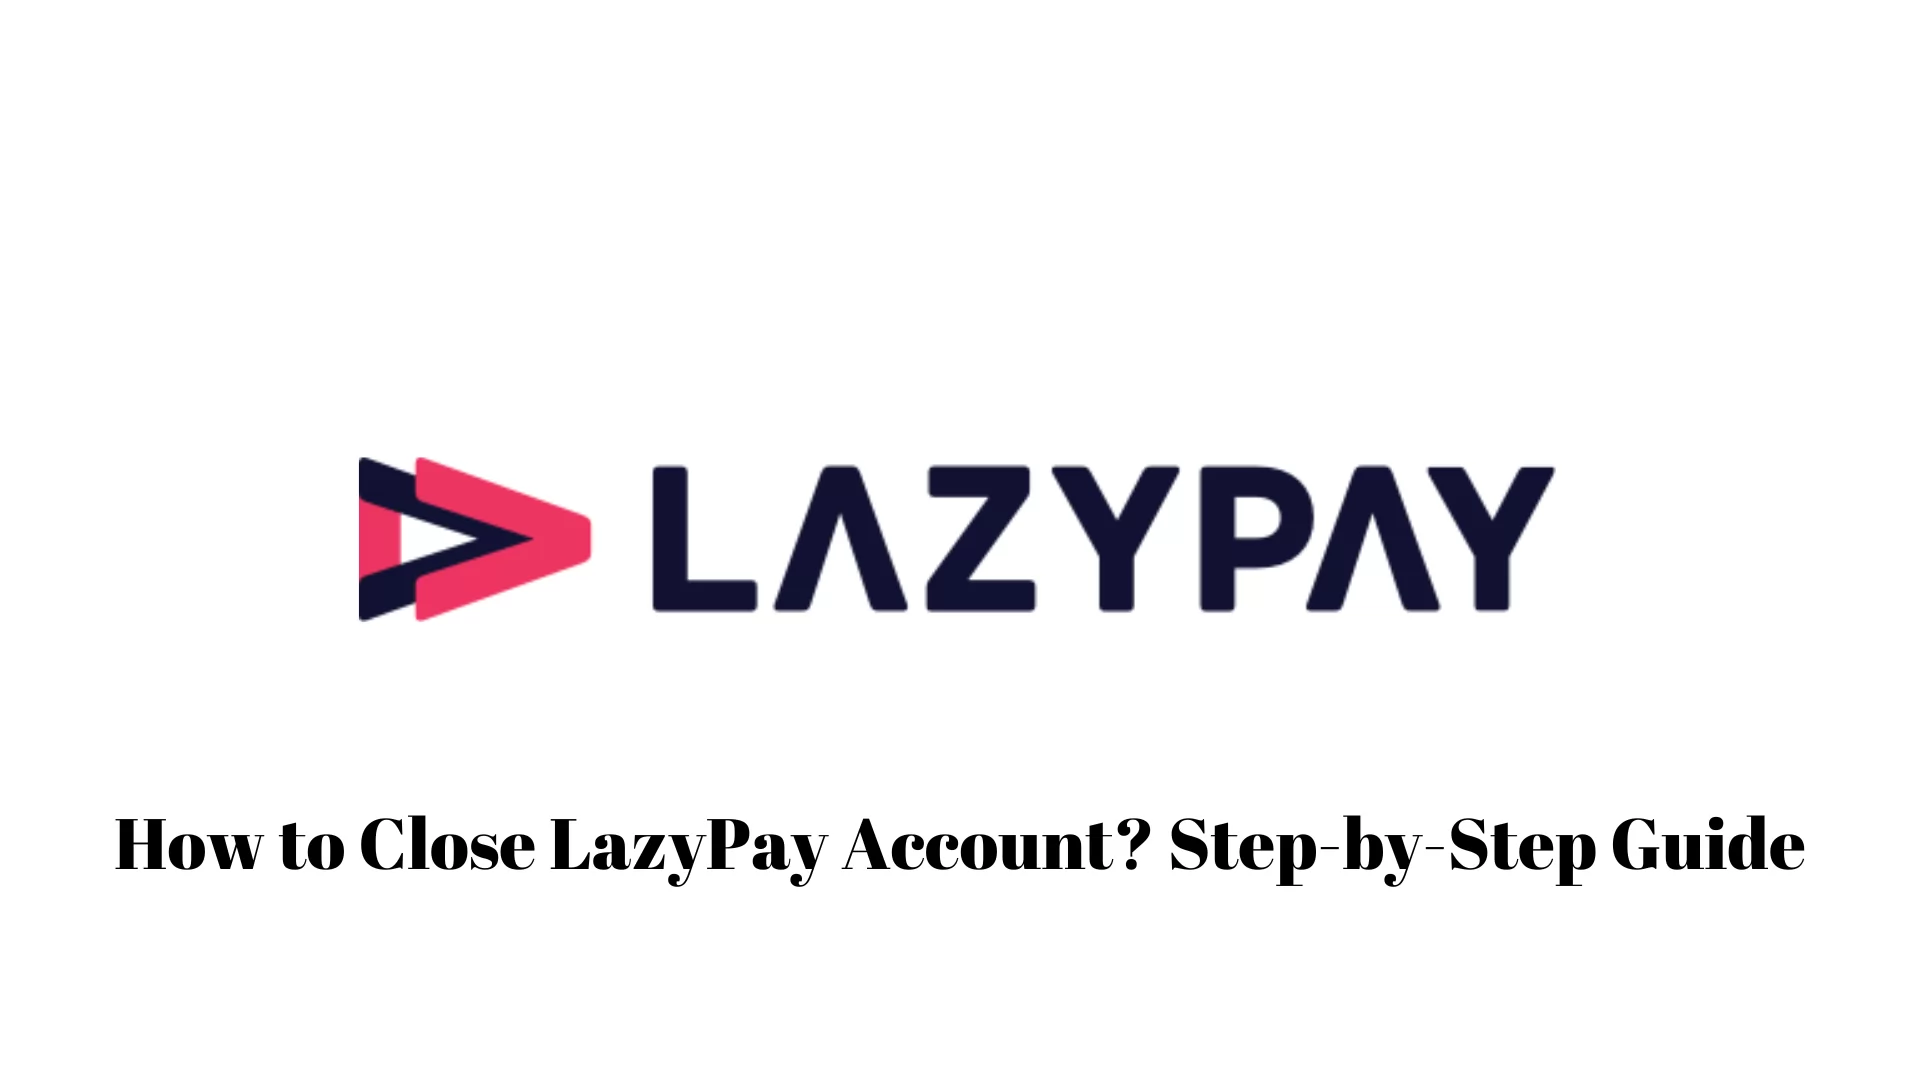 How to Close LazyPay Account? Step-by-Step Guide